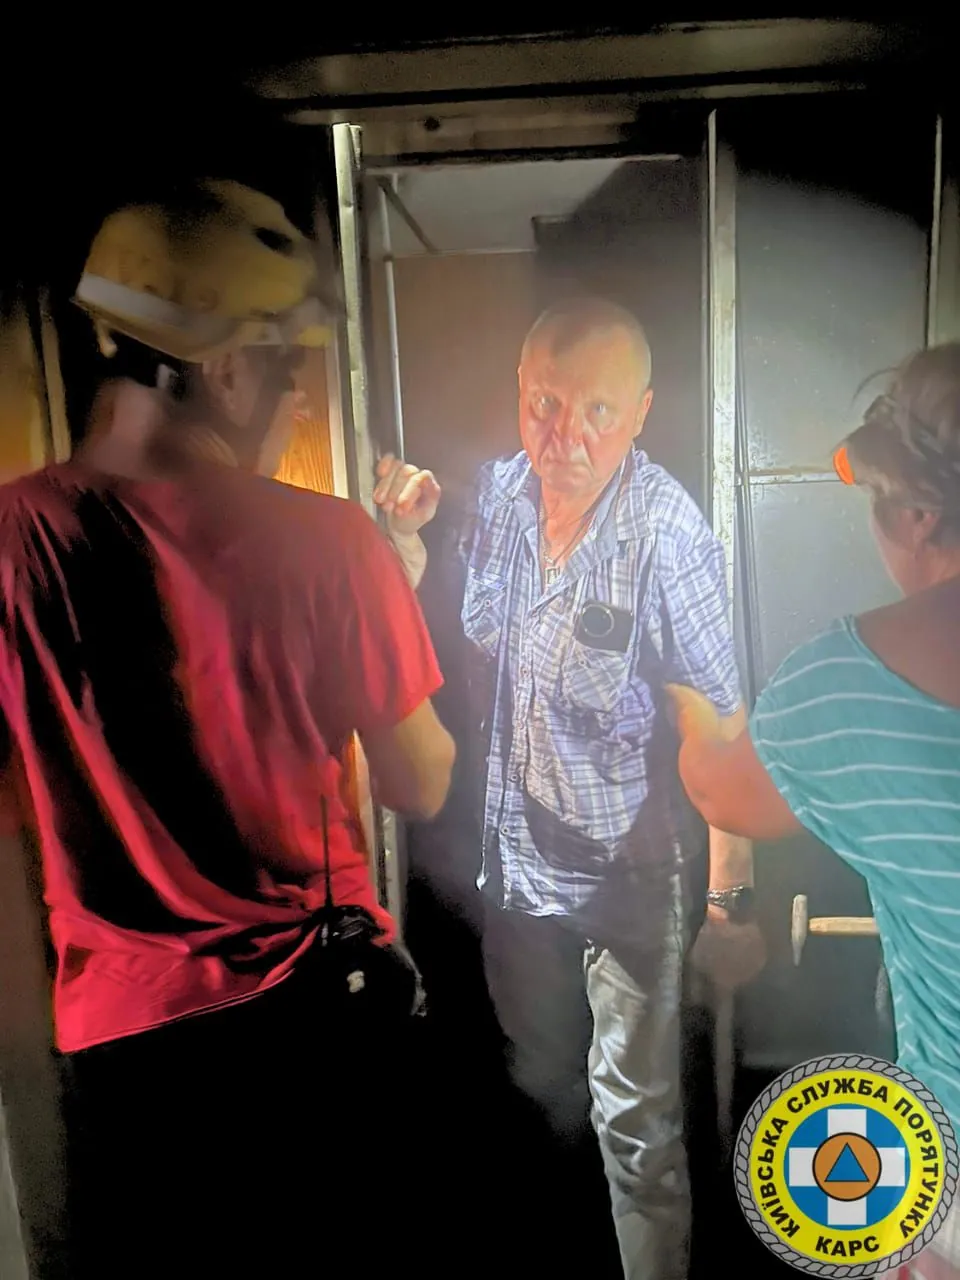 A man with diabetes rescued from a blocked elevator in Kyiv